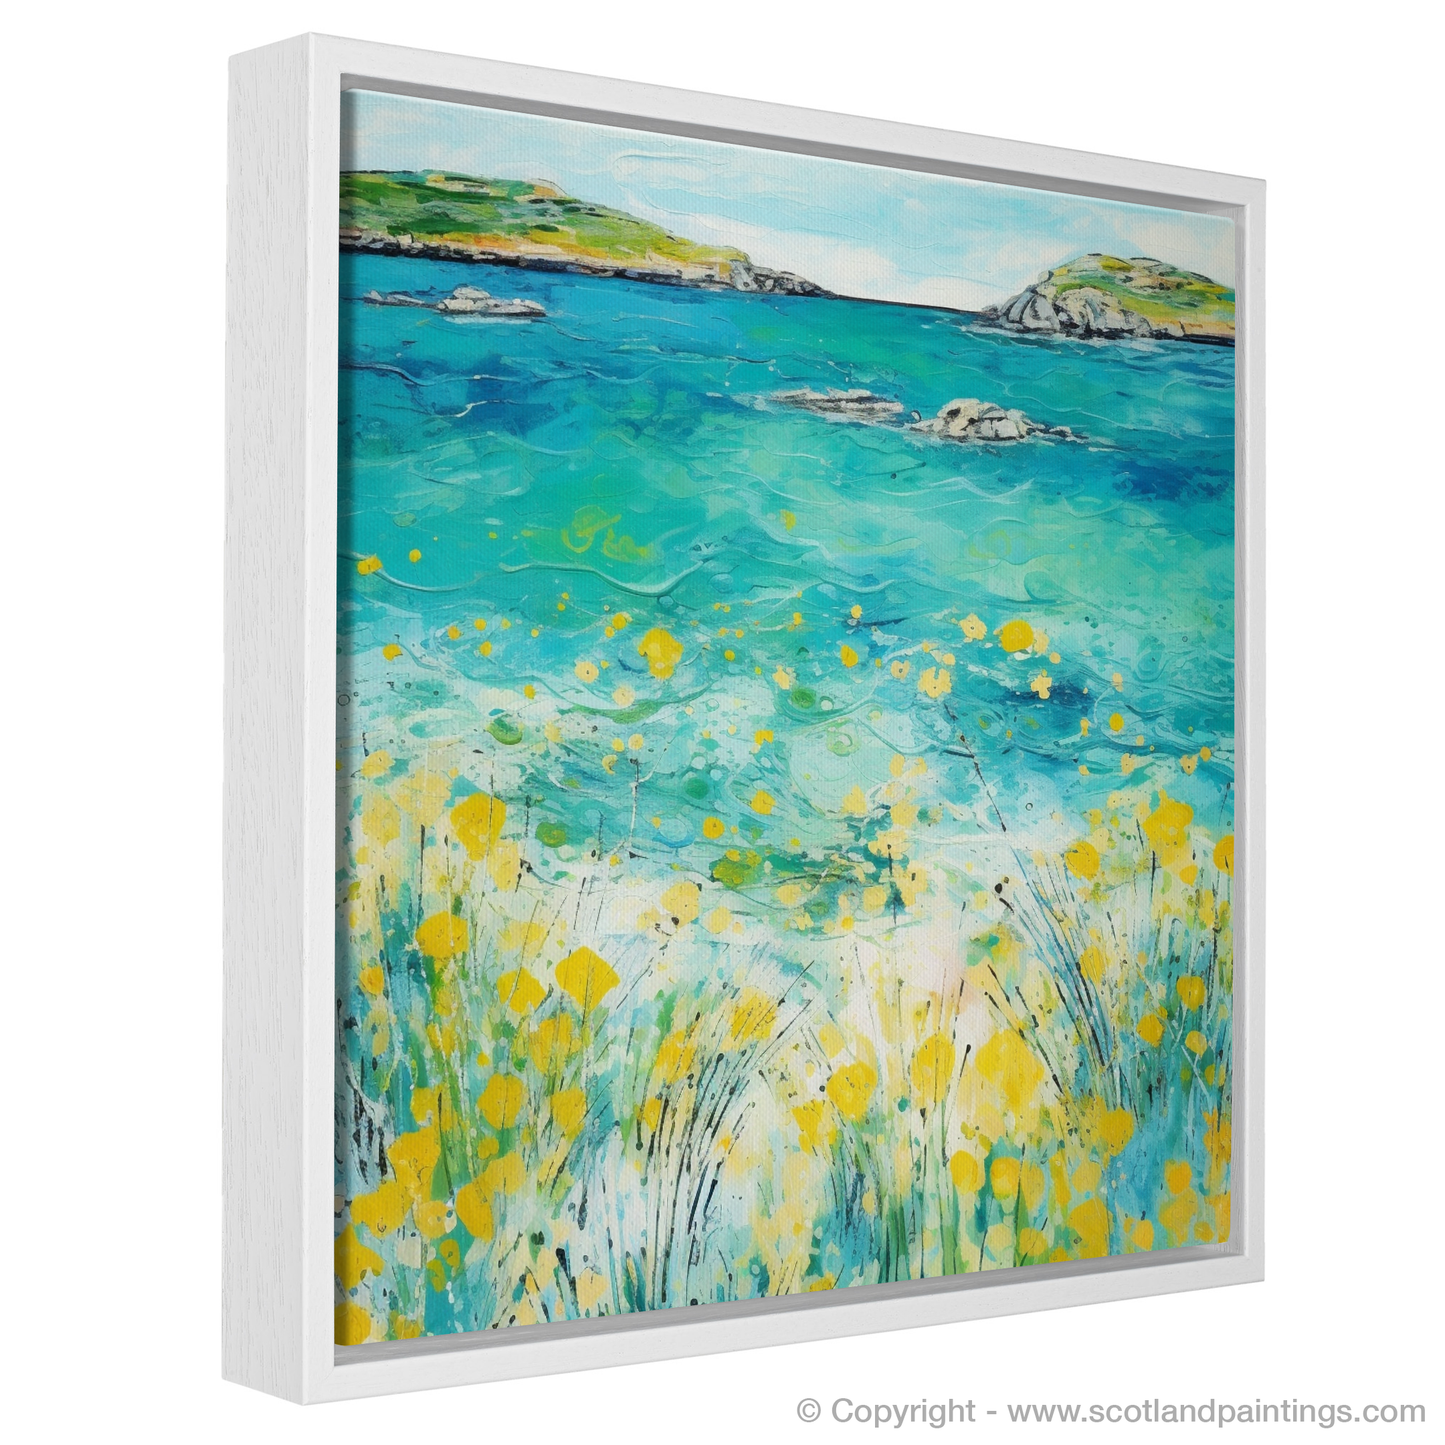 Painting and Art Print of Isle of Barra, Outer Hebrides in summer entitled "Isle of Barra Abstract: A Hebridean Summer Dream".